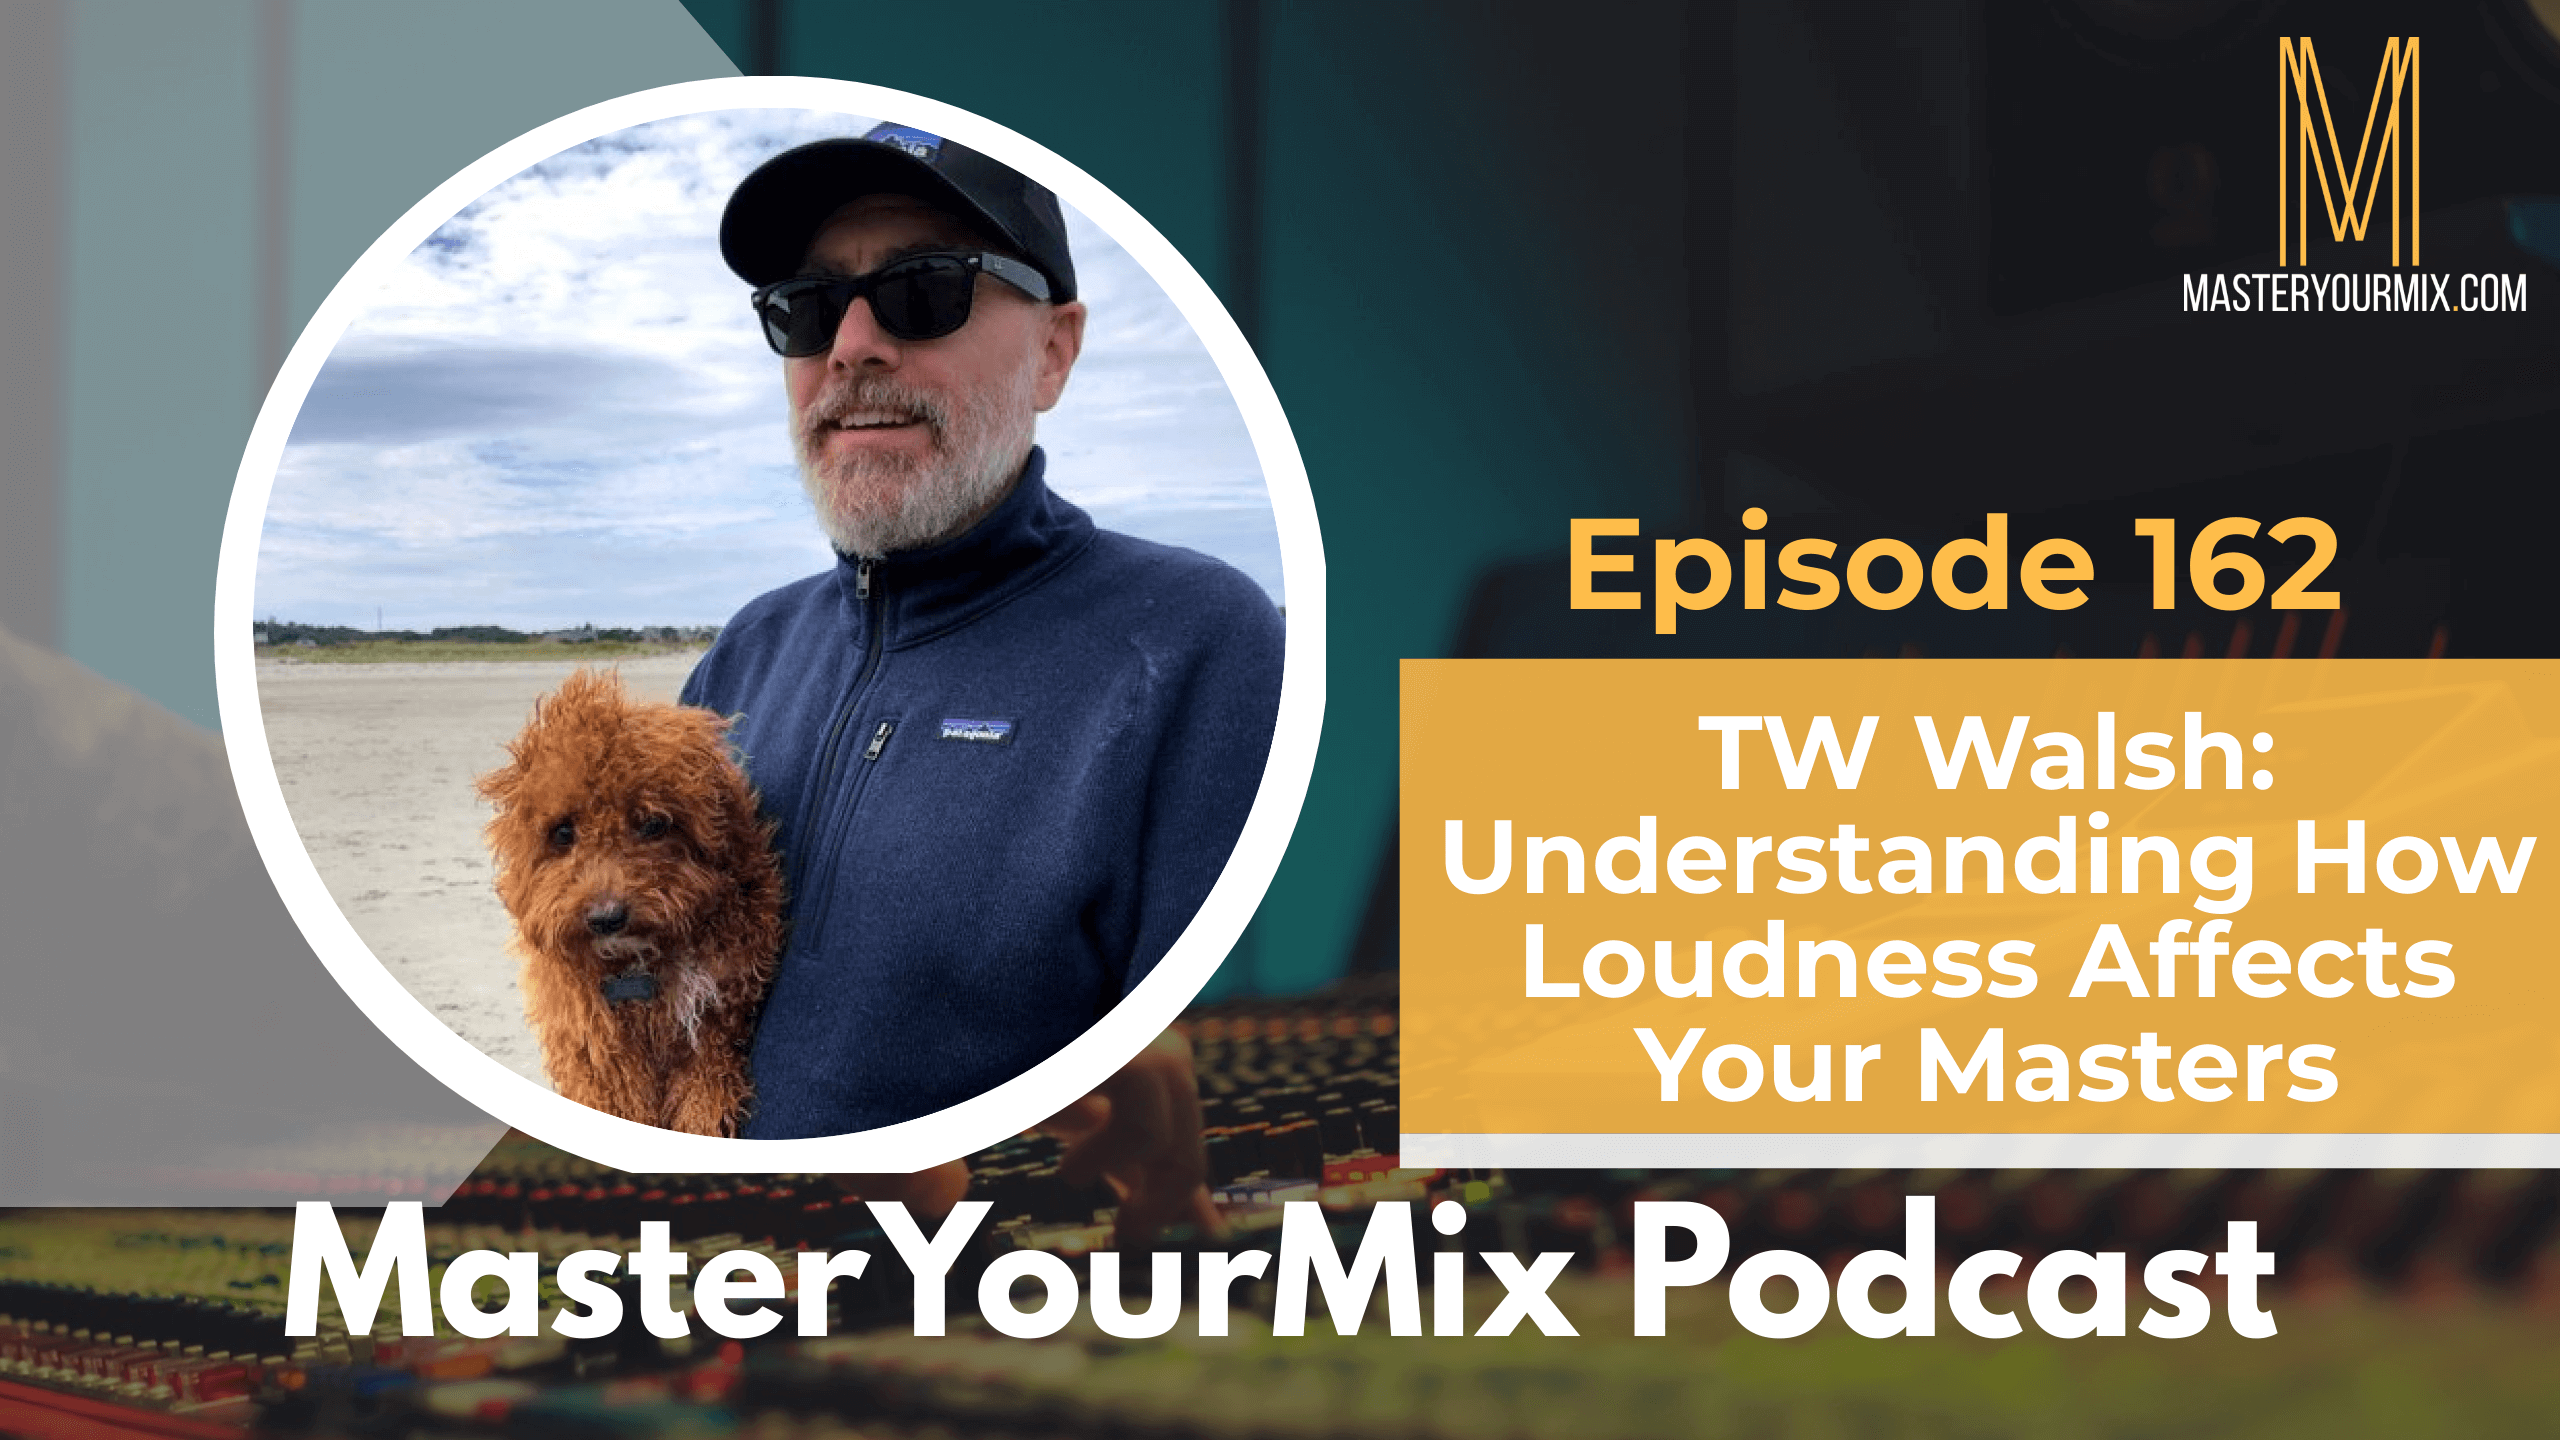 master your mix podcast, ep 162 tw walsh